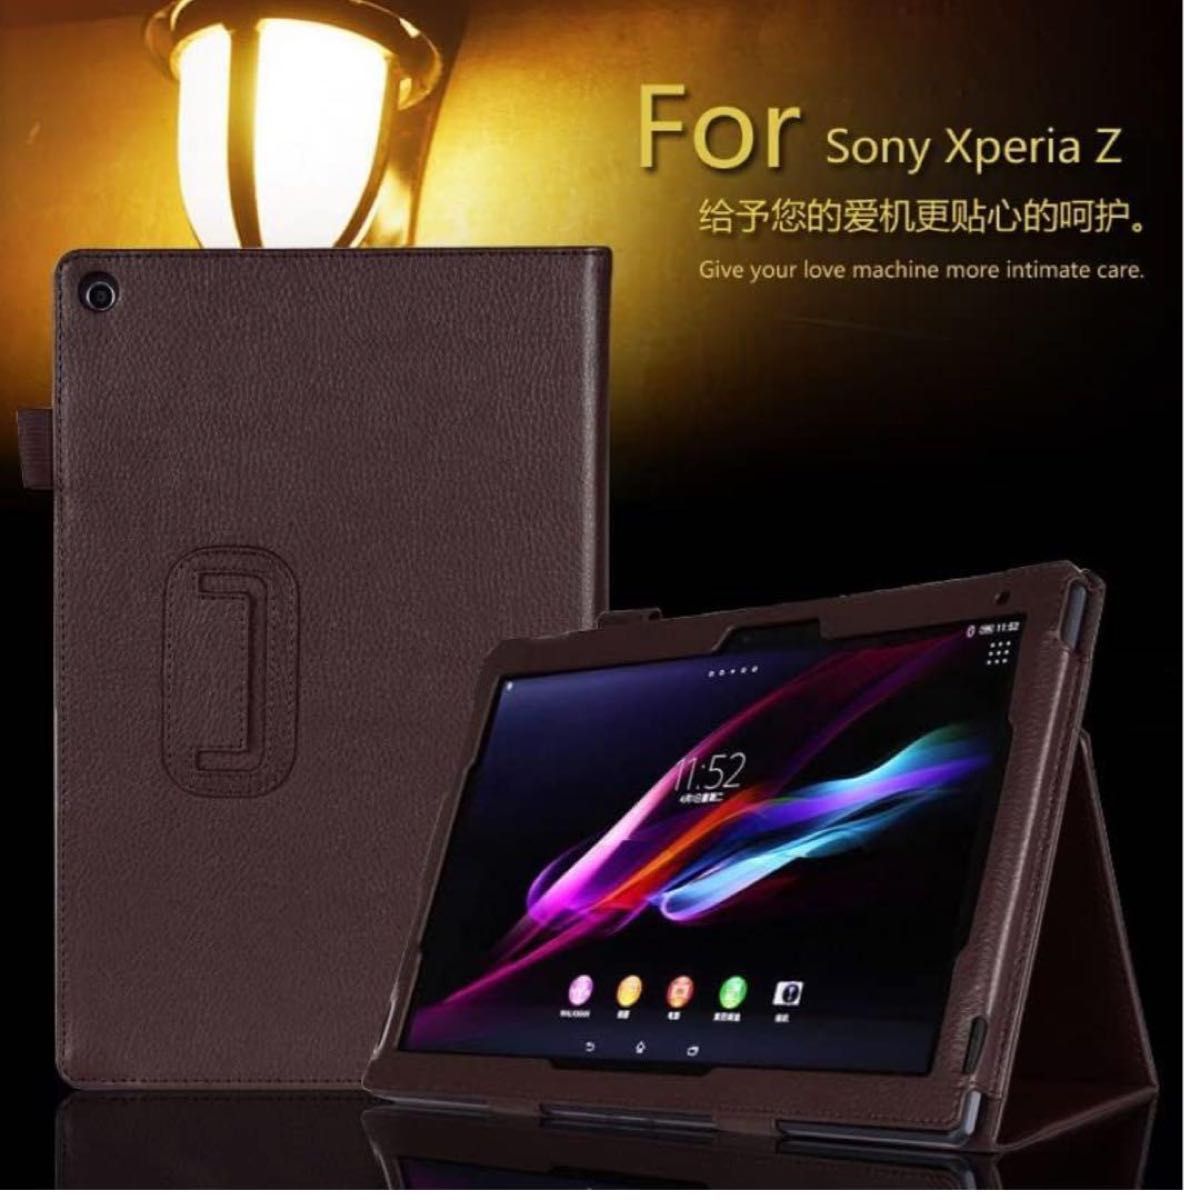 Sony Xperia Z4 Tabletタブレットケース10.1インチカバー　レッド　赤　ソニー